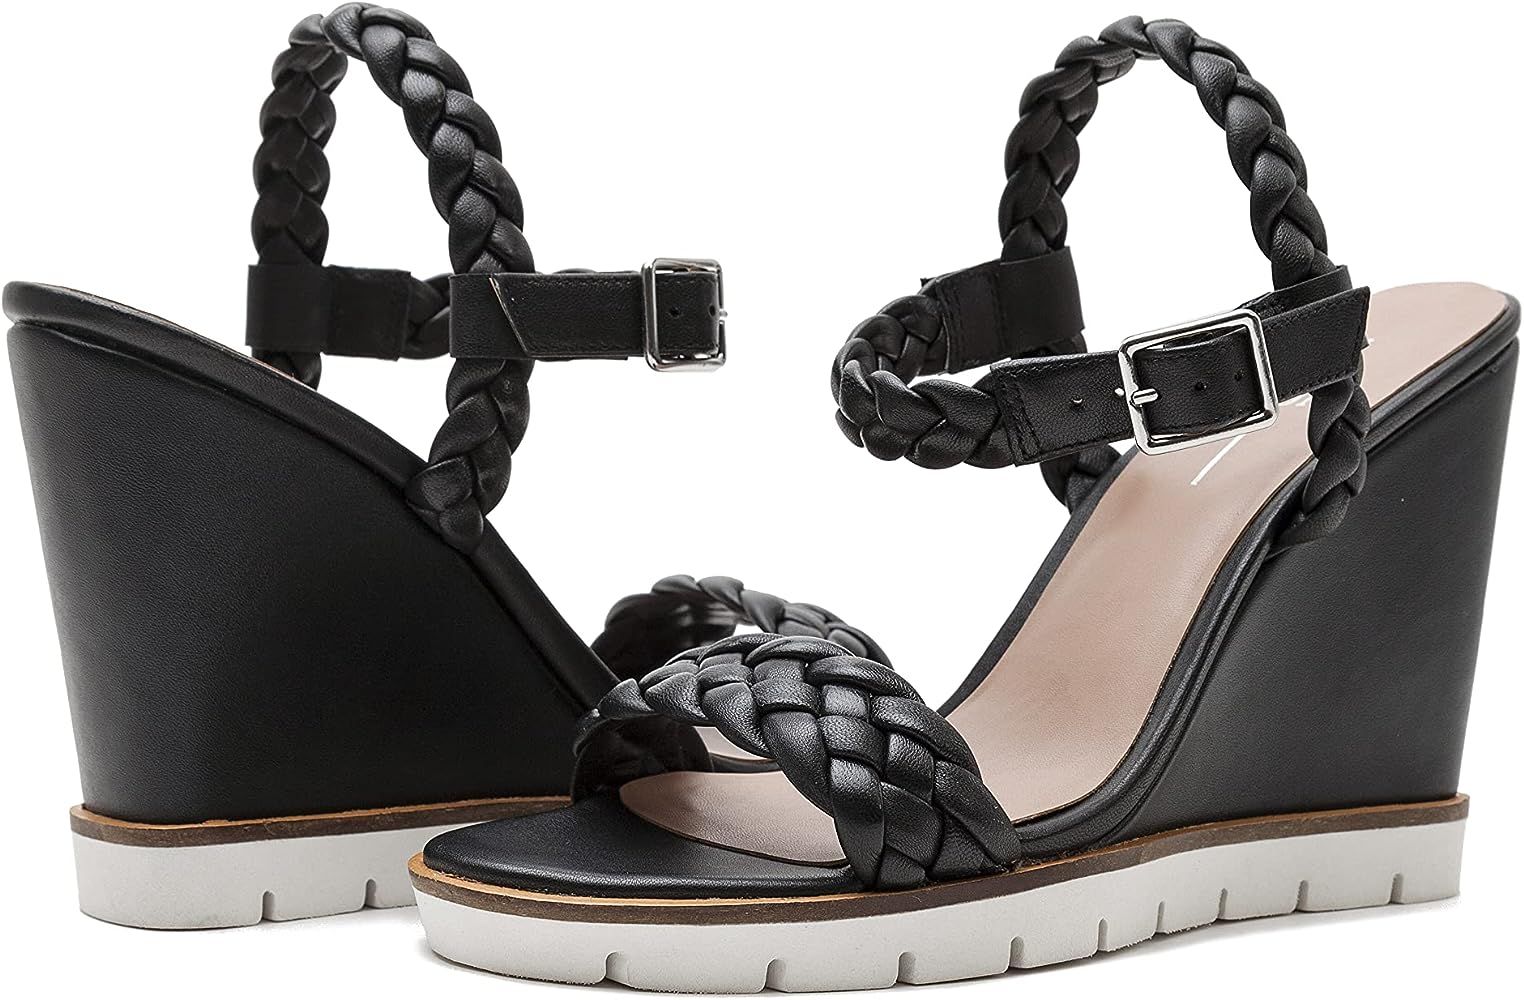 Linea Paolo - ESIE - Womens High Heel Sporty Nappa Leather Wedge Sandal With Hand Braided Straps | Amazon (US)